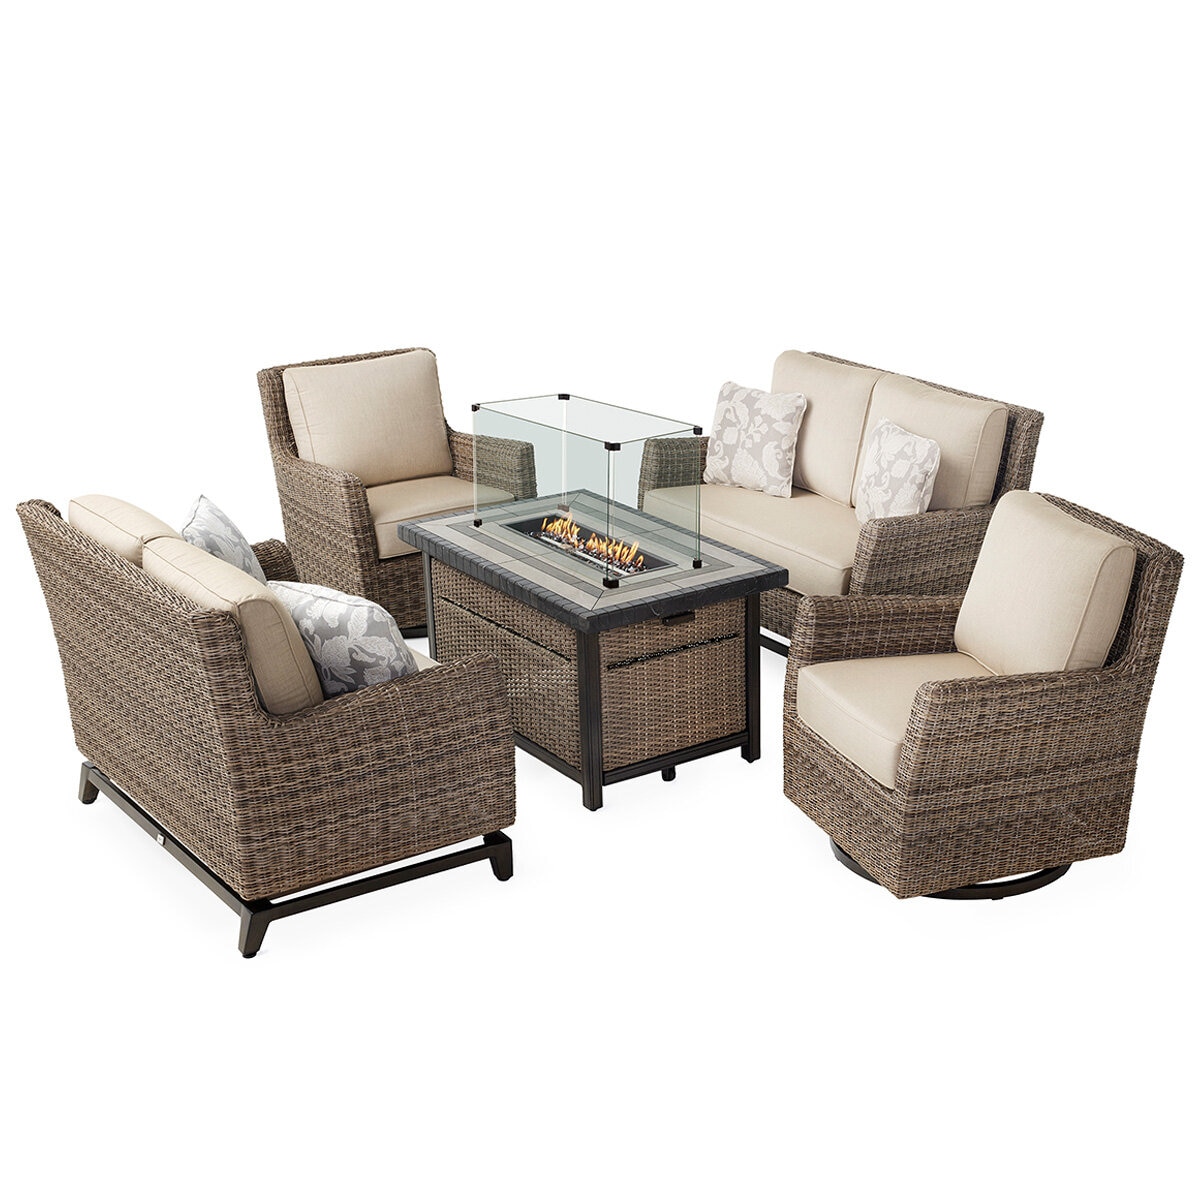 Agio Anderson 5 Piece Fire Seating Set